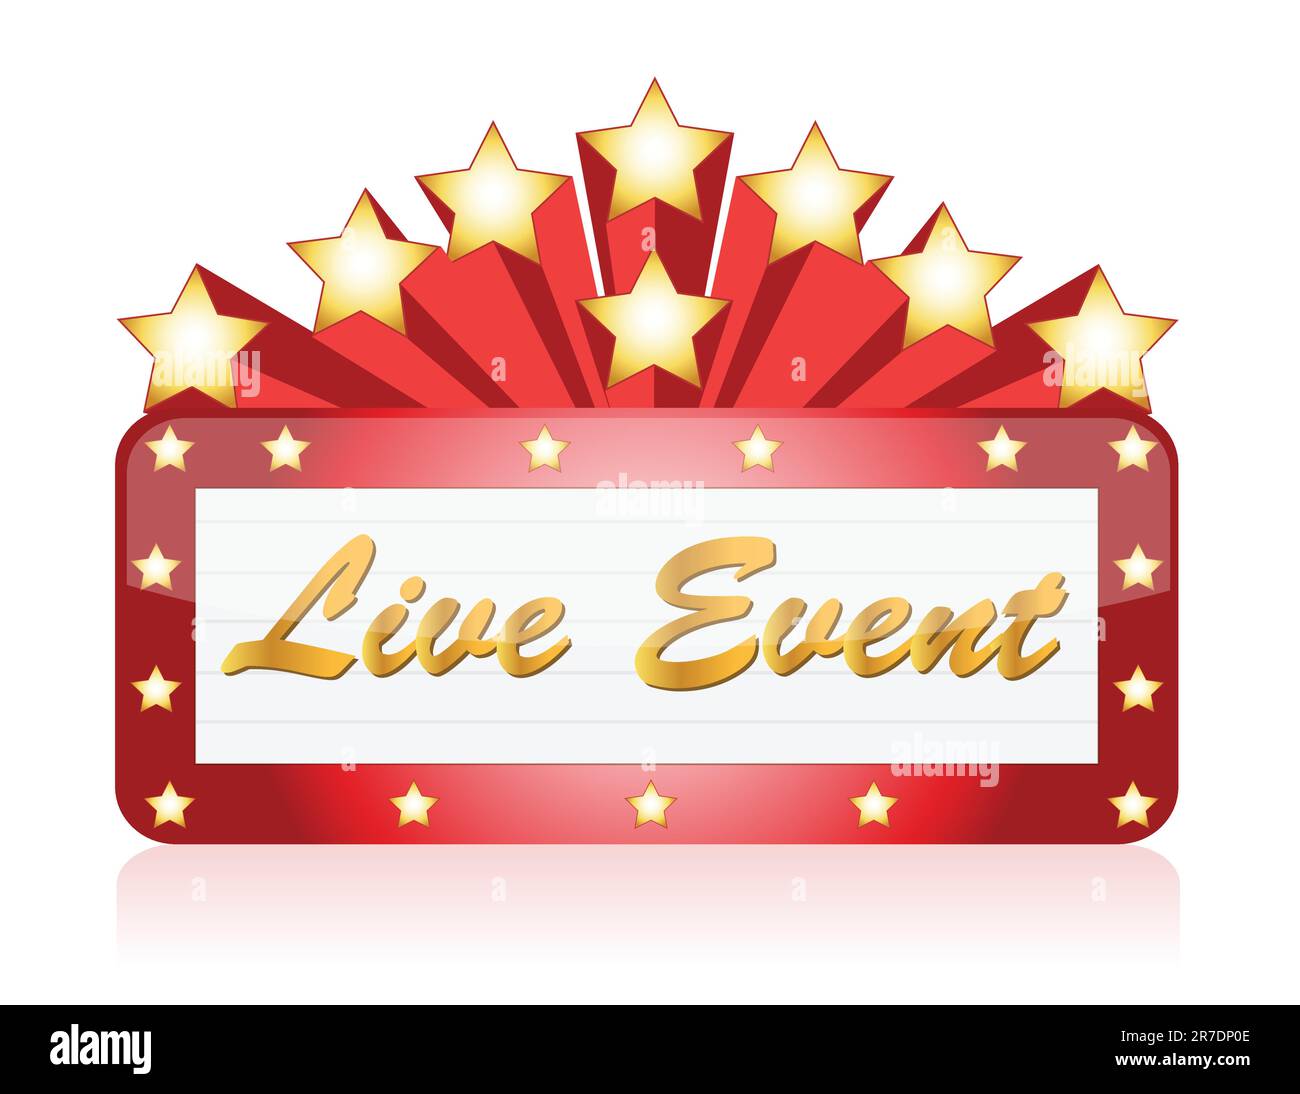 Live event red Star Neon theater / Movie Sign Stock Vector